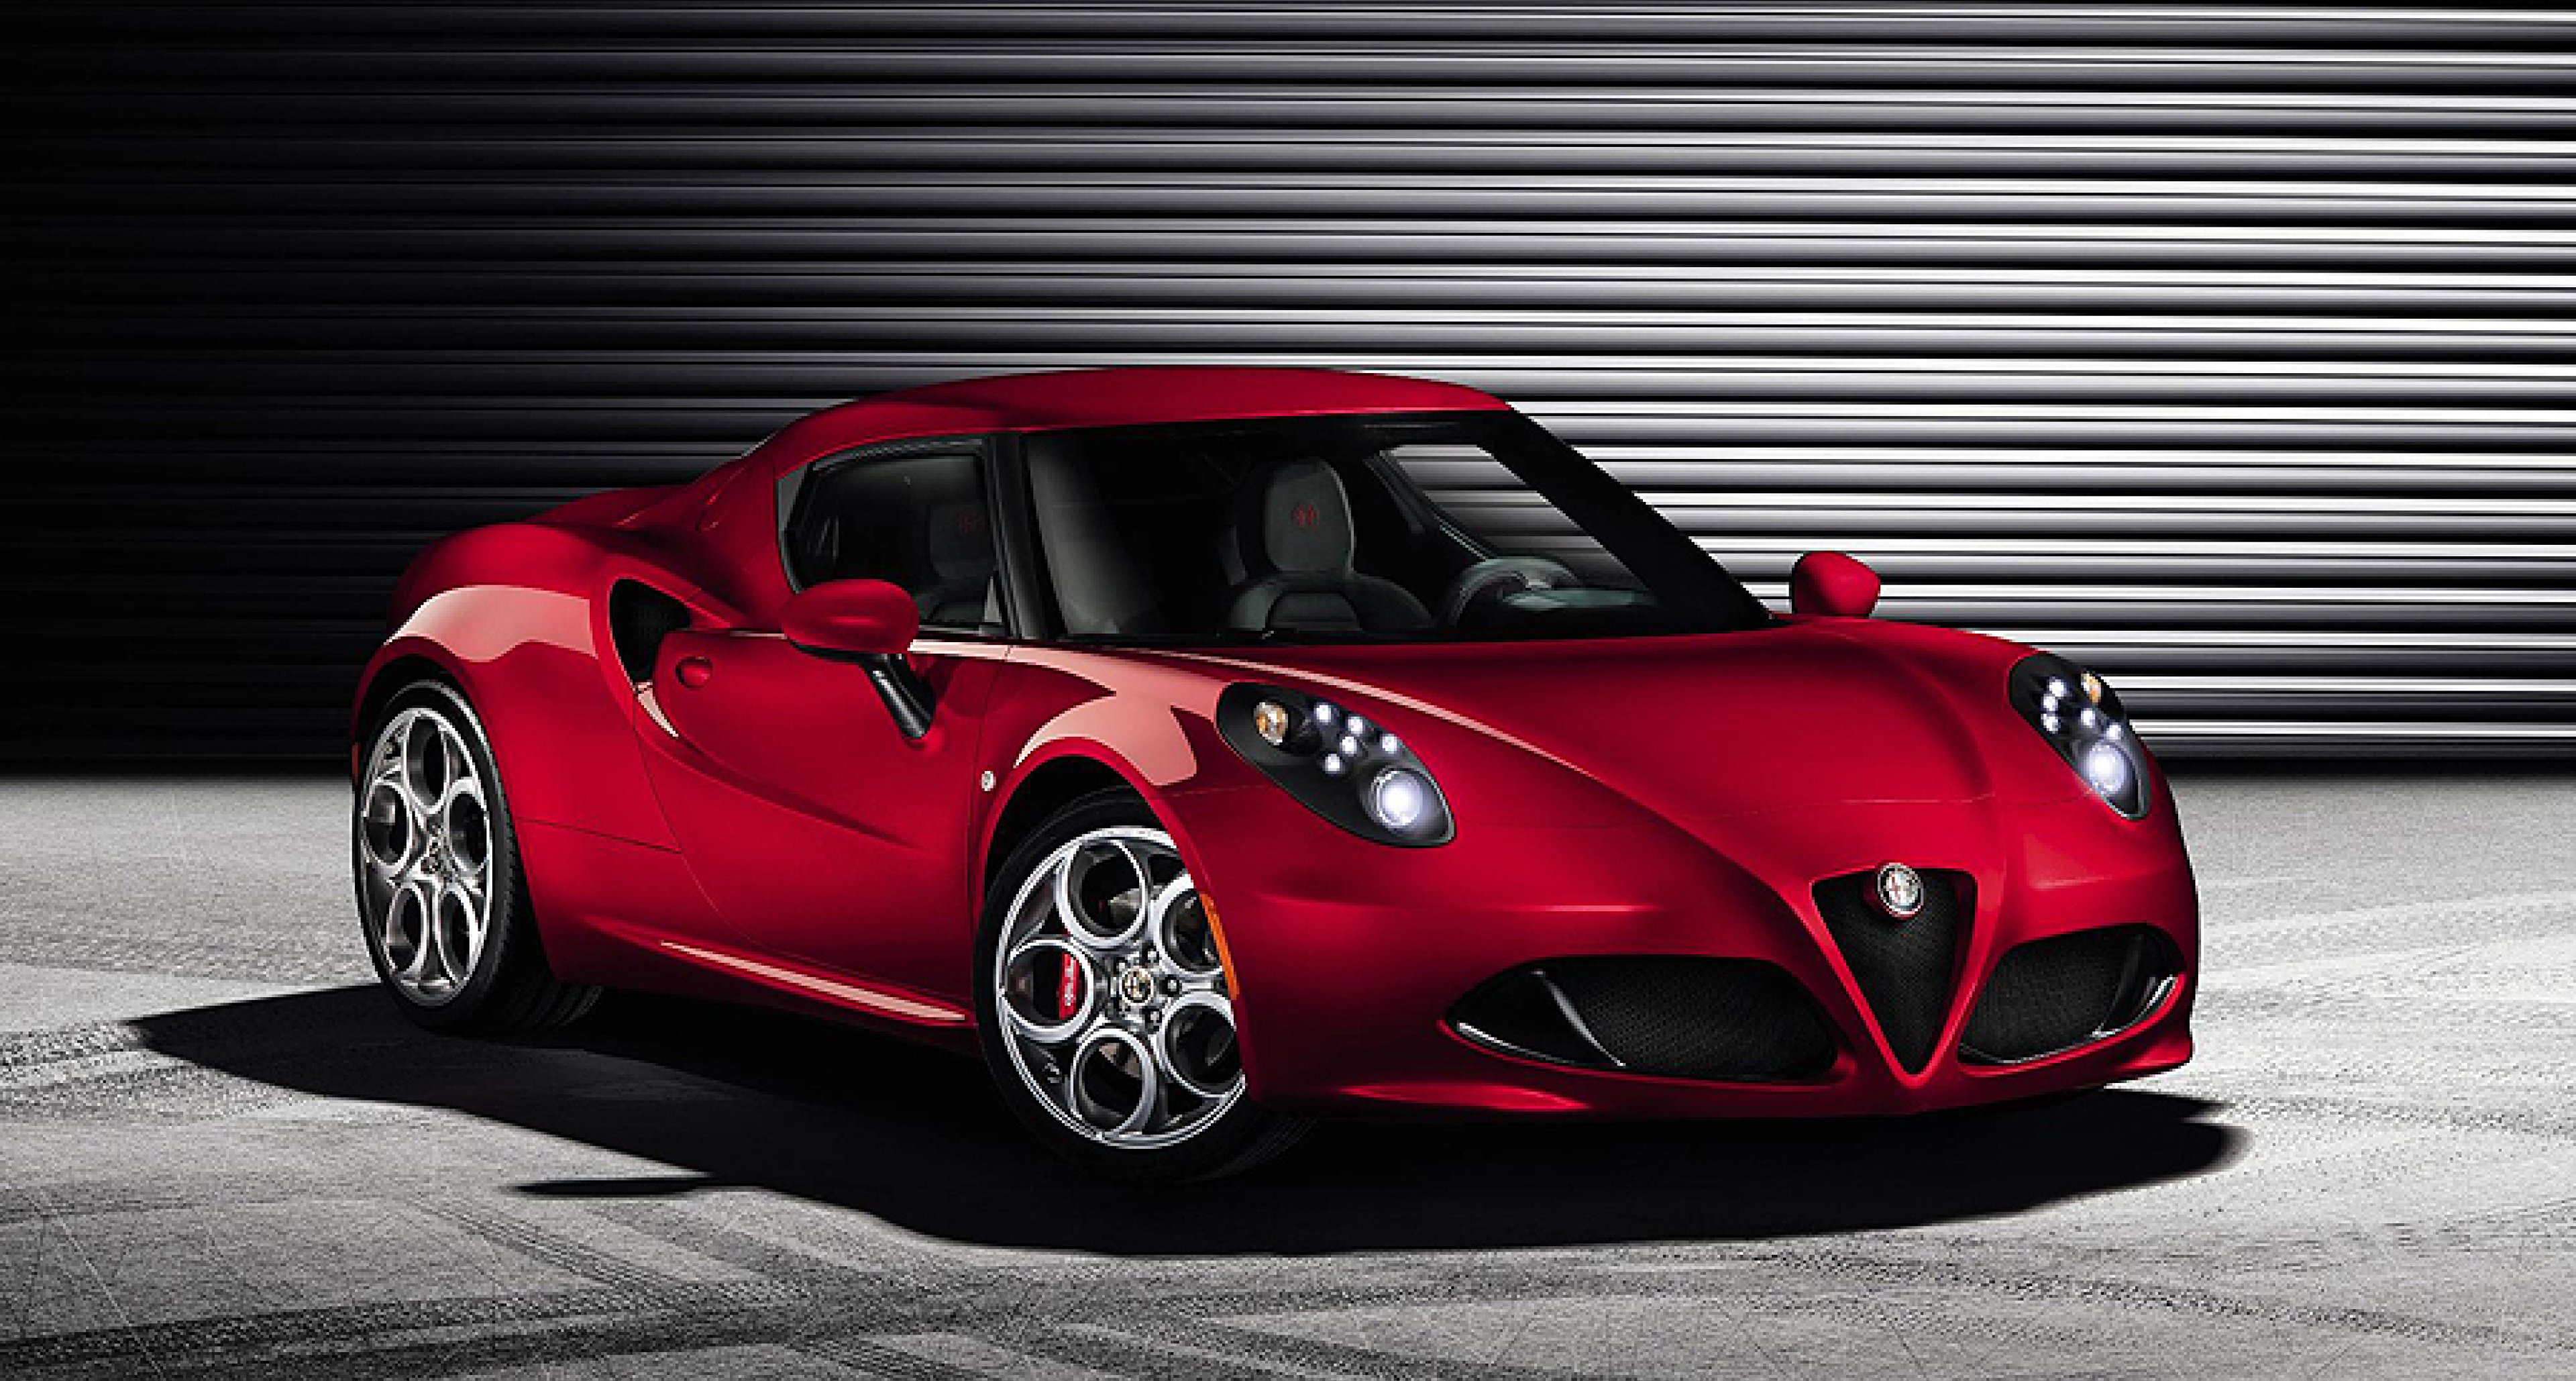 Compact Supercar: Alfa 4C is here at last